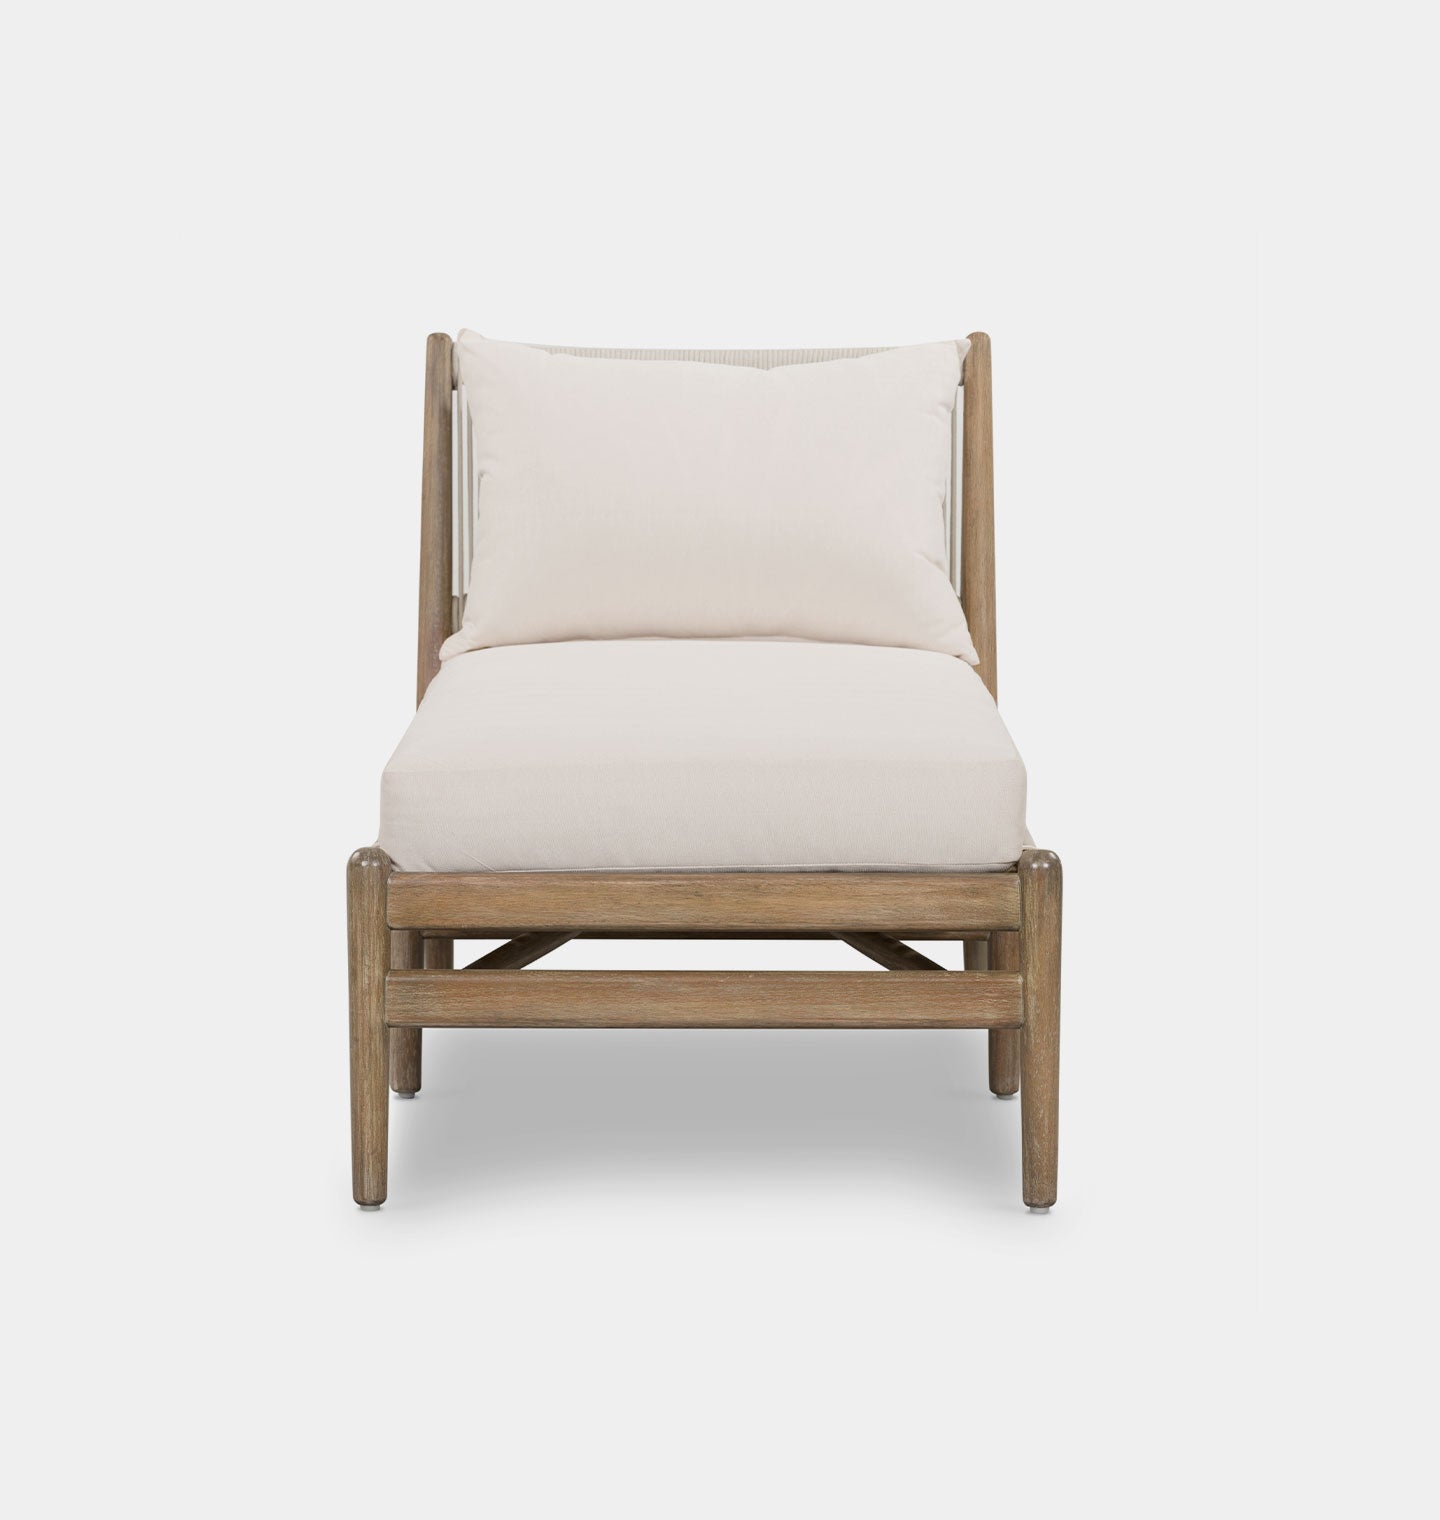 Roselyn Outdoor Chaise Natural